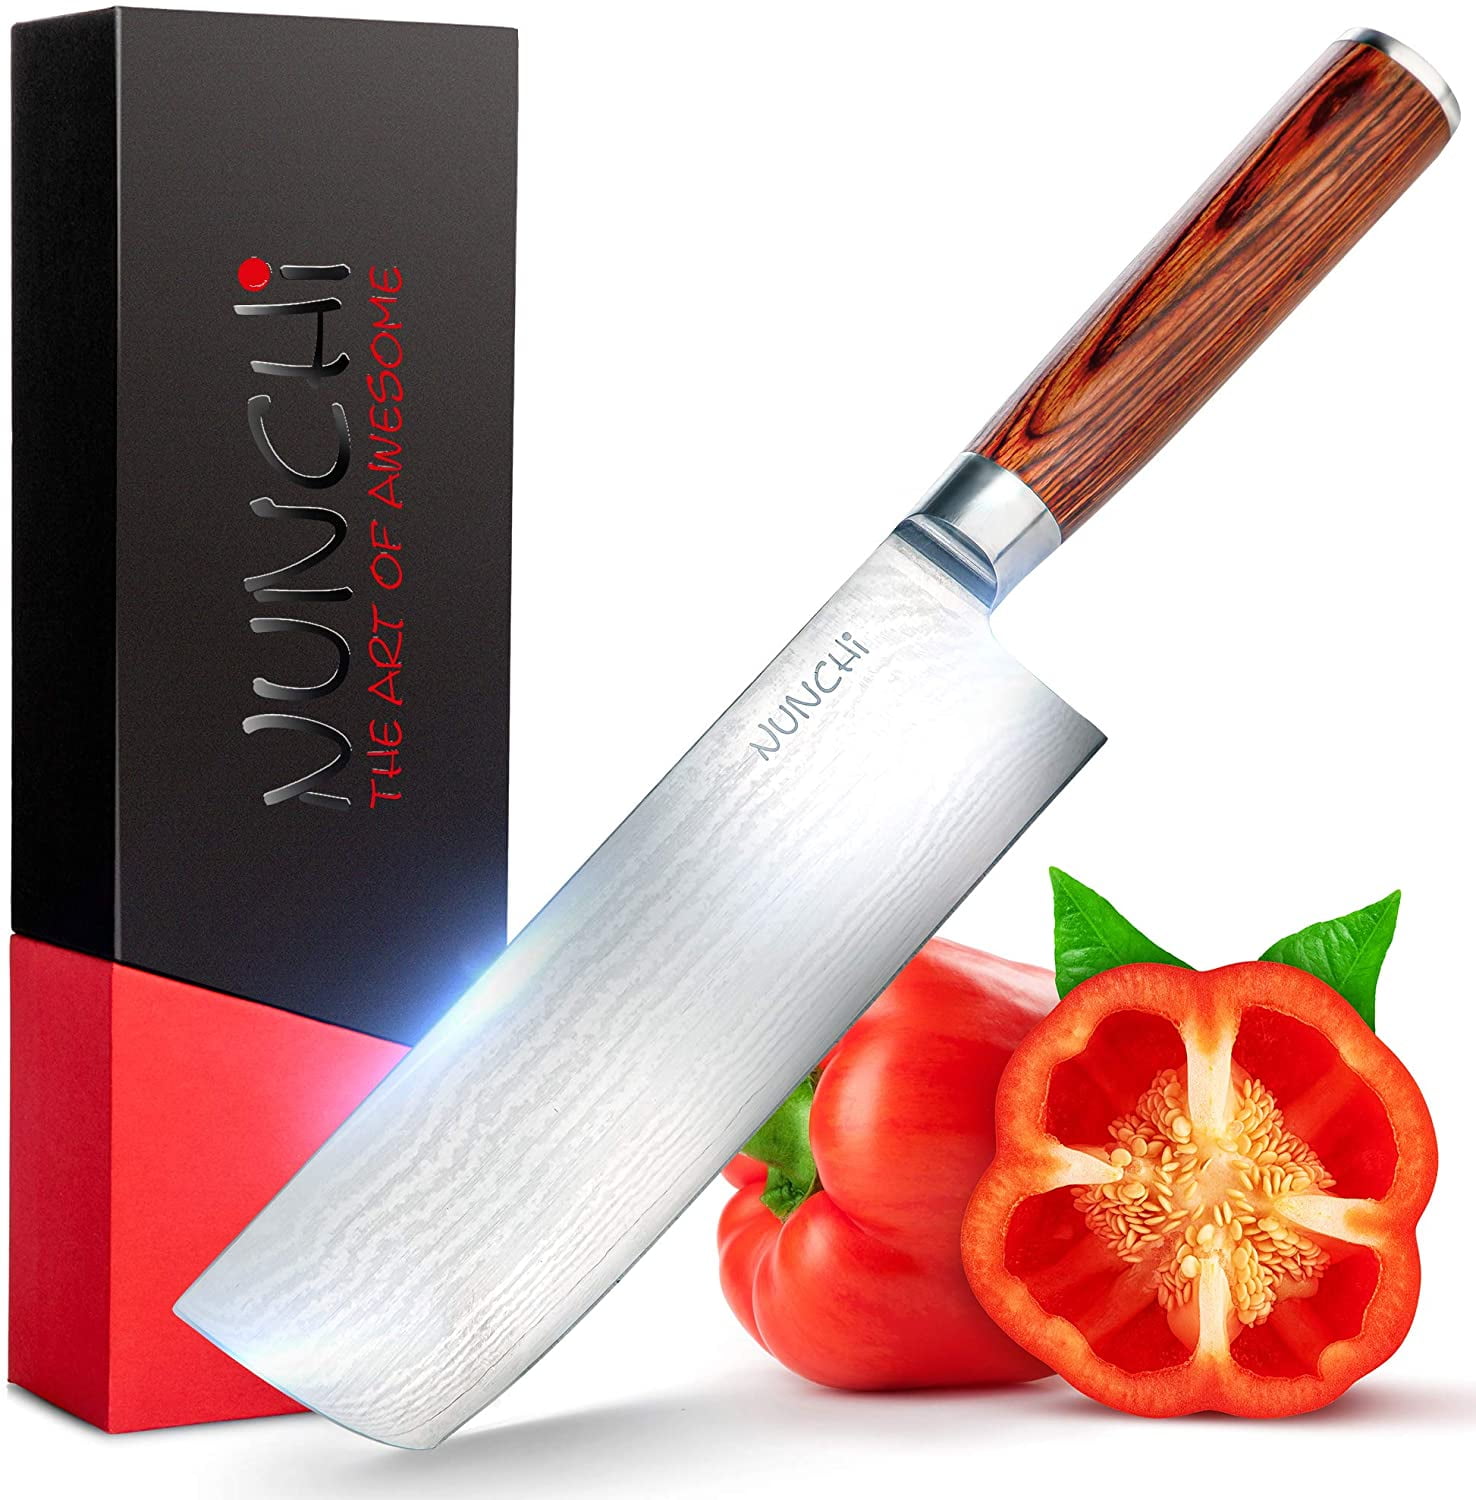 MOSFiATA Nakiri Knife 7 Inch Vegetable Cleaver Knife, 5Cr15Mov High Carbon  Stainless Steel Kitchen Cooking Knife with Ergonomic Pakkawood Handle, Full  Tang Meat Cutting Knife with Sheath for Kitchen 